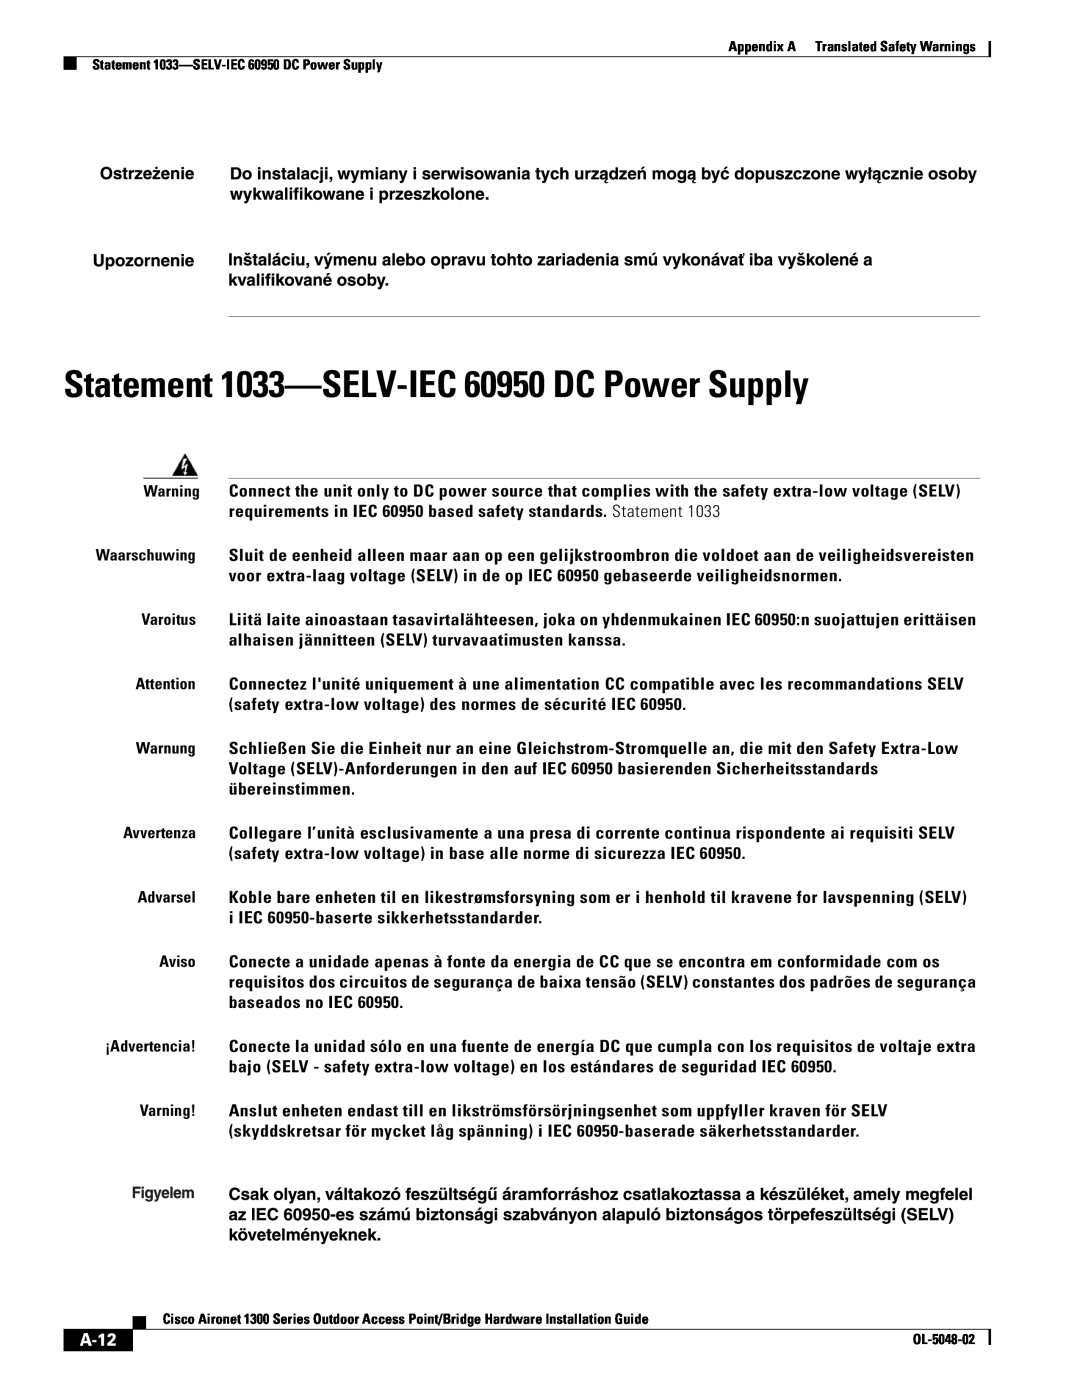 Cisco Systems 1300 Series manual Statement 1033-SELV-IEC 60950 DC Power Supply, A-12 